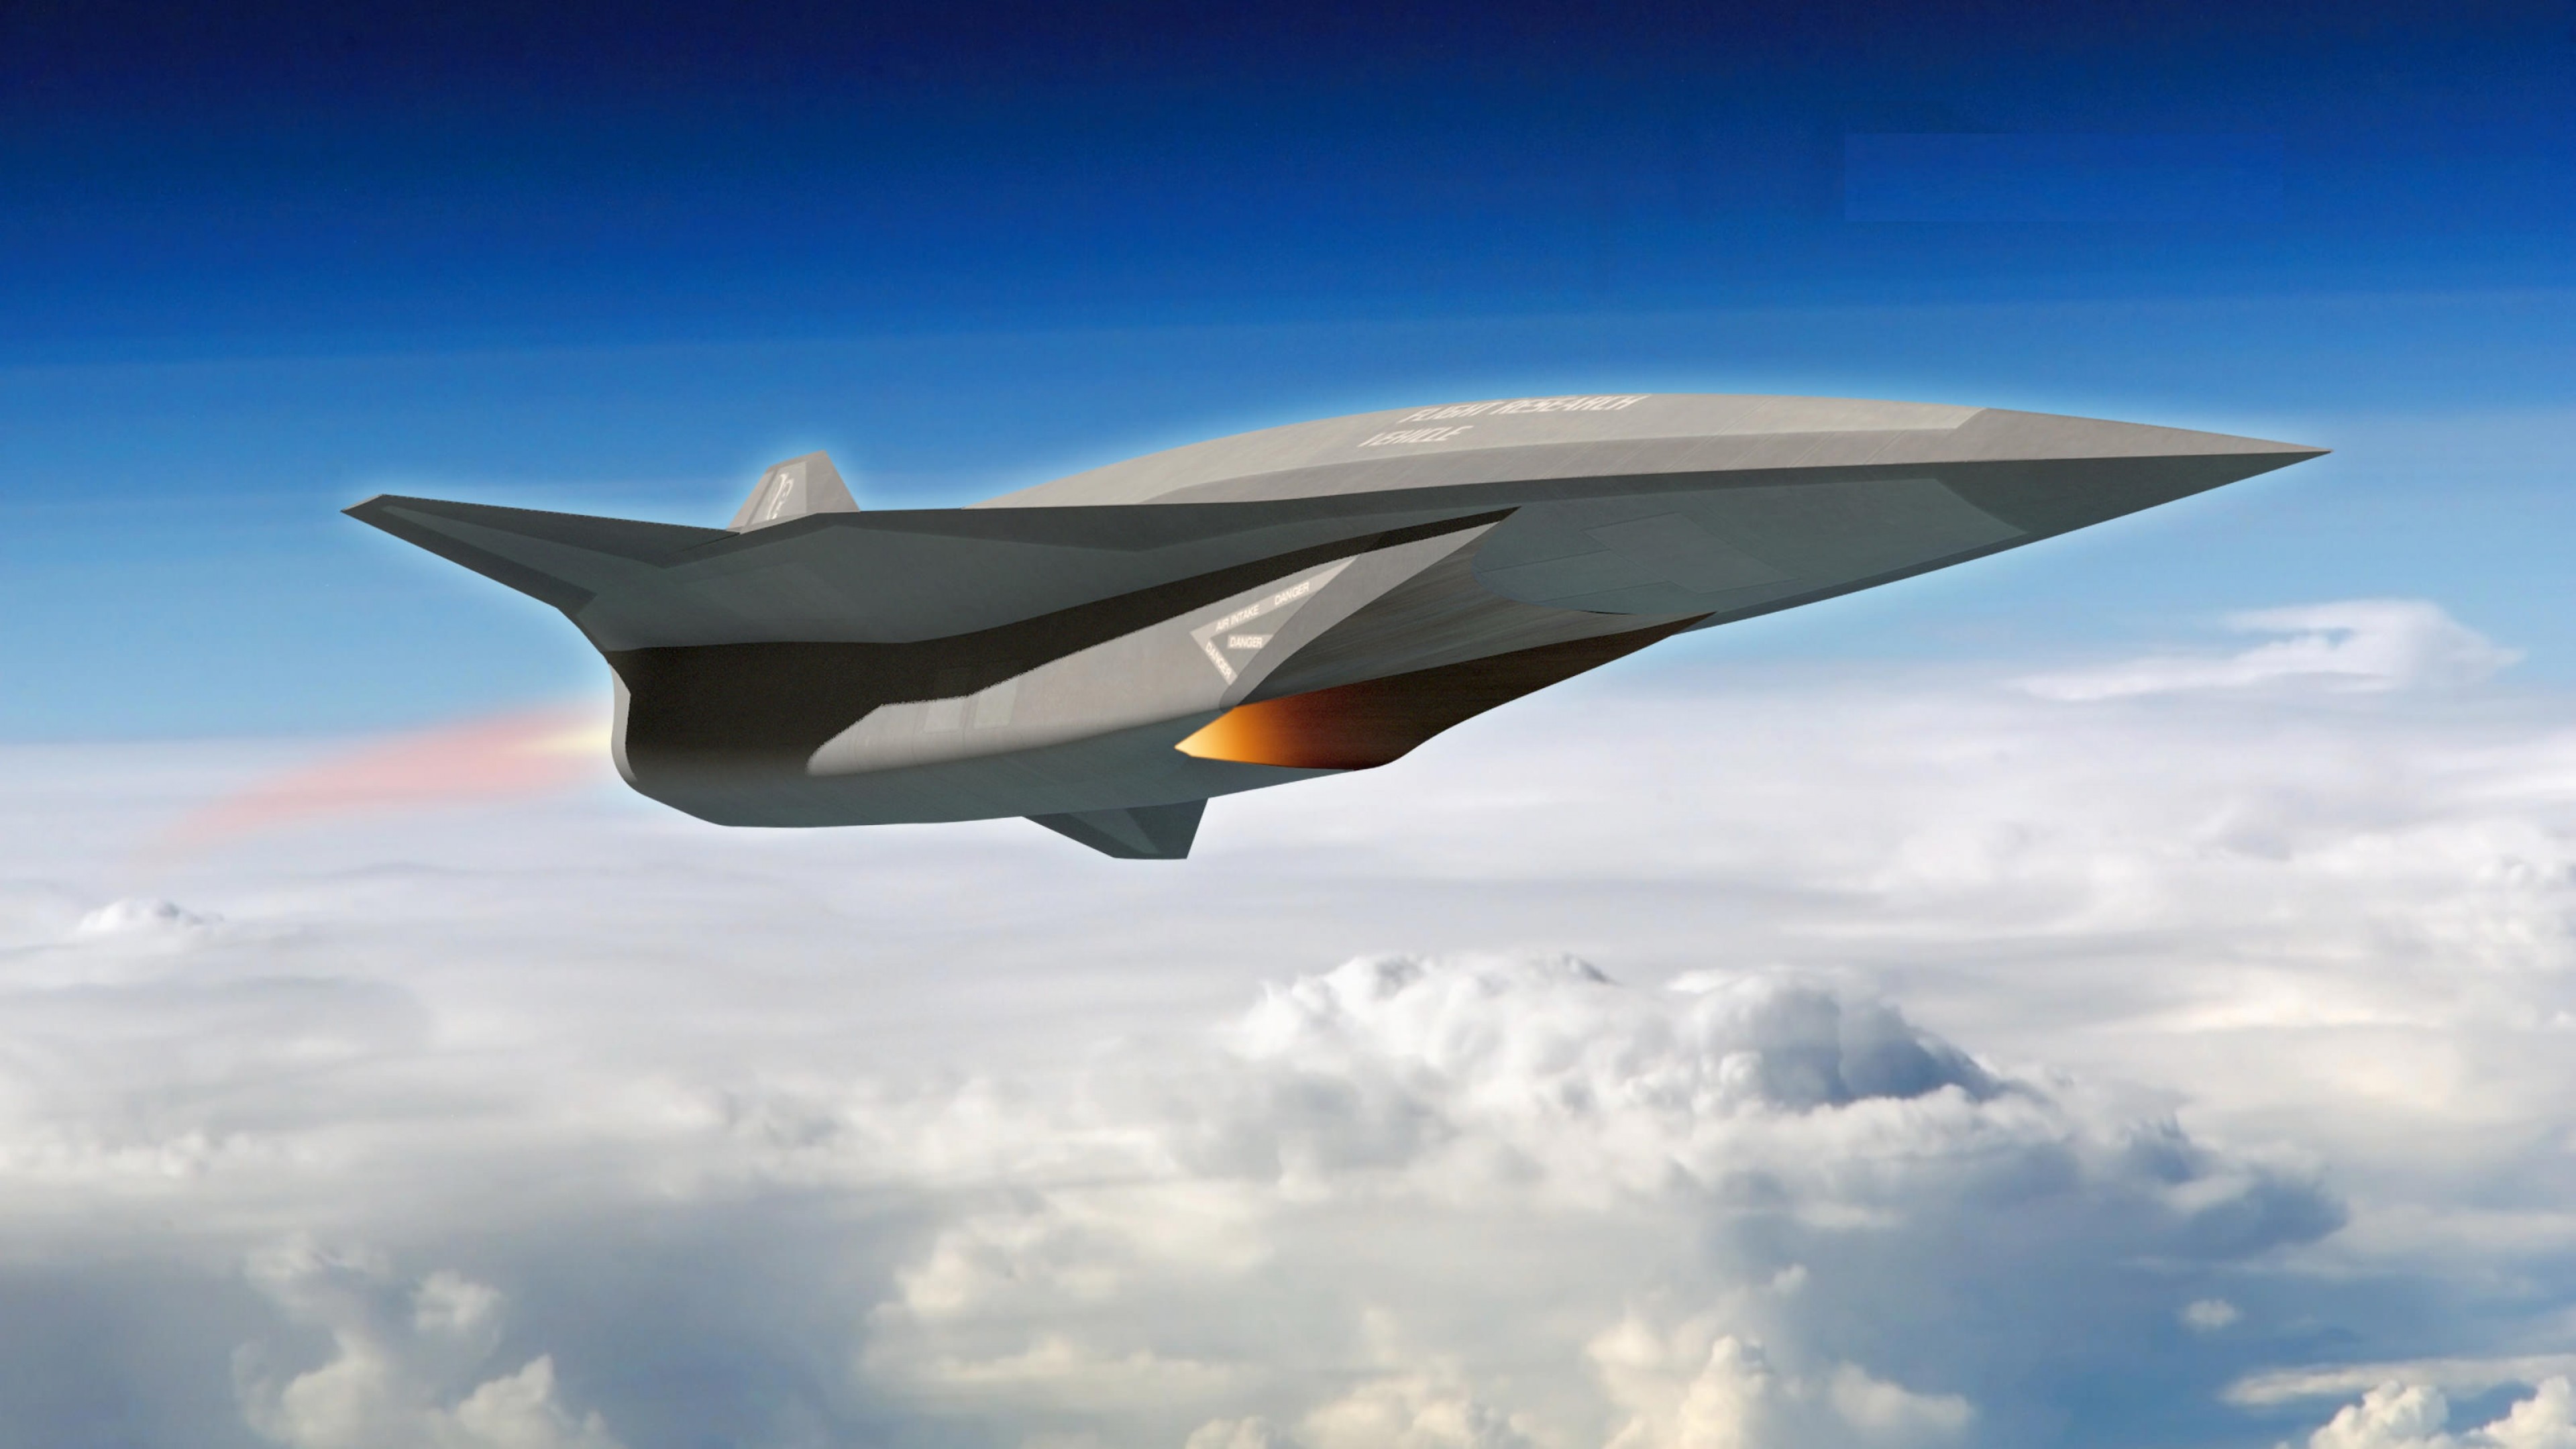 Wallpaper SR- Lockheed, Hypersonic Unmanned Reconnaissance Aircraft, Darpa, future aircraft, jet, plane, aircraft, U.S. Air Force, Military